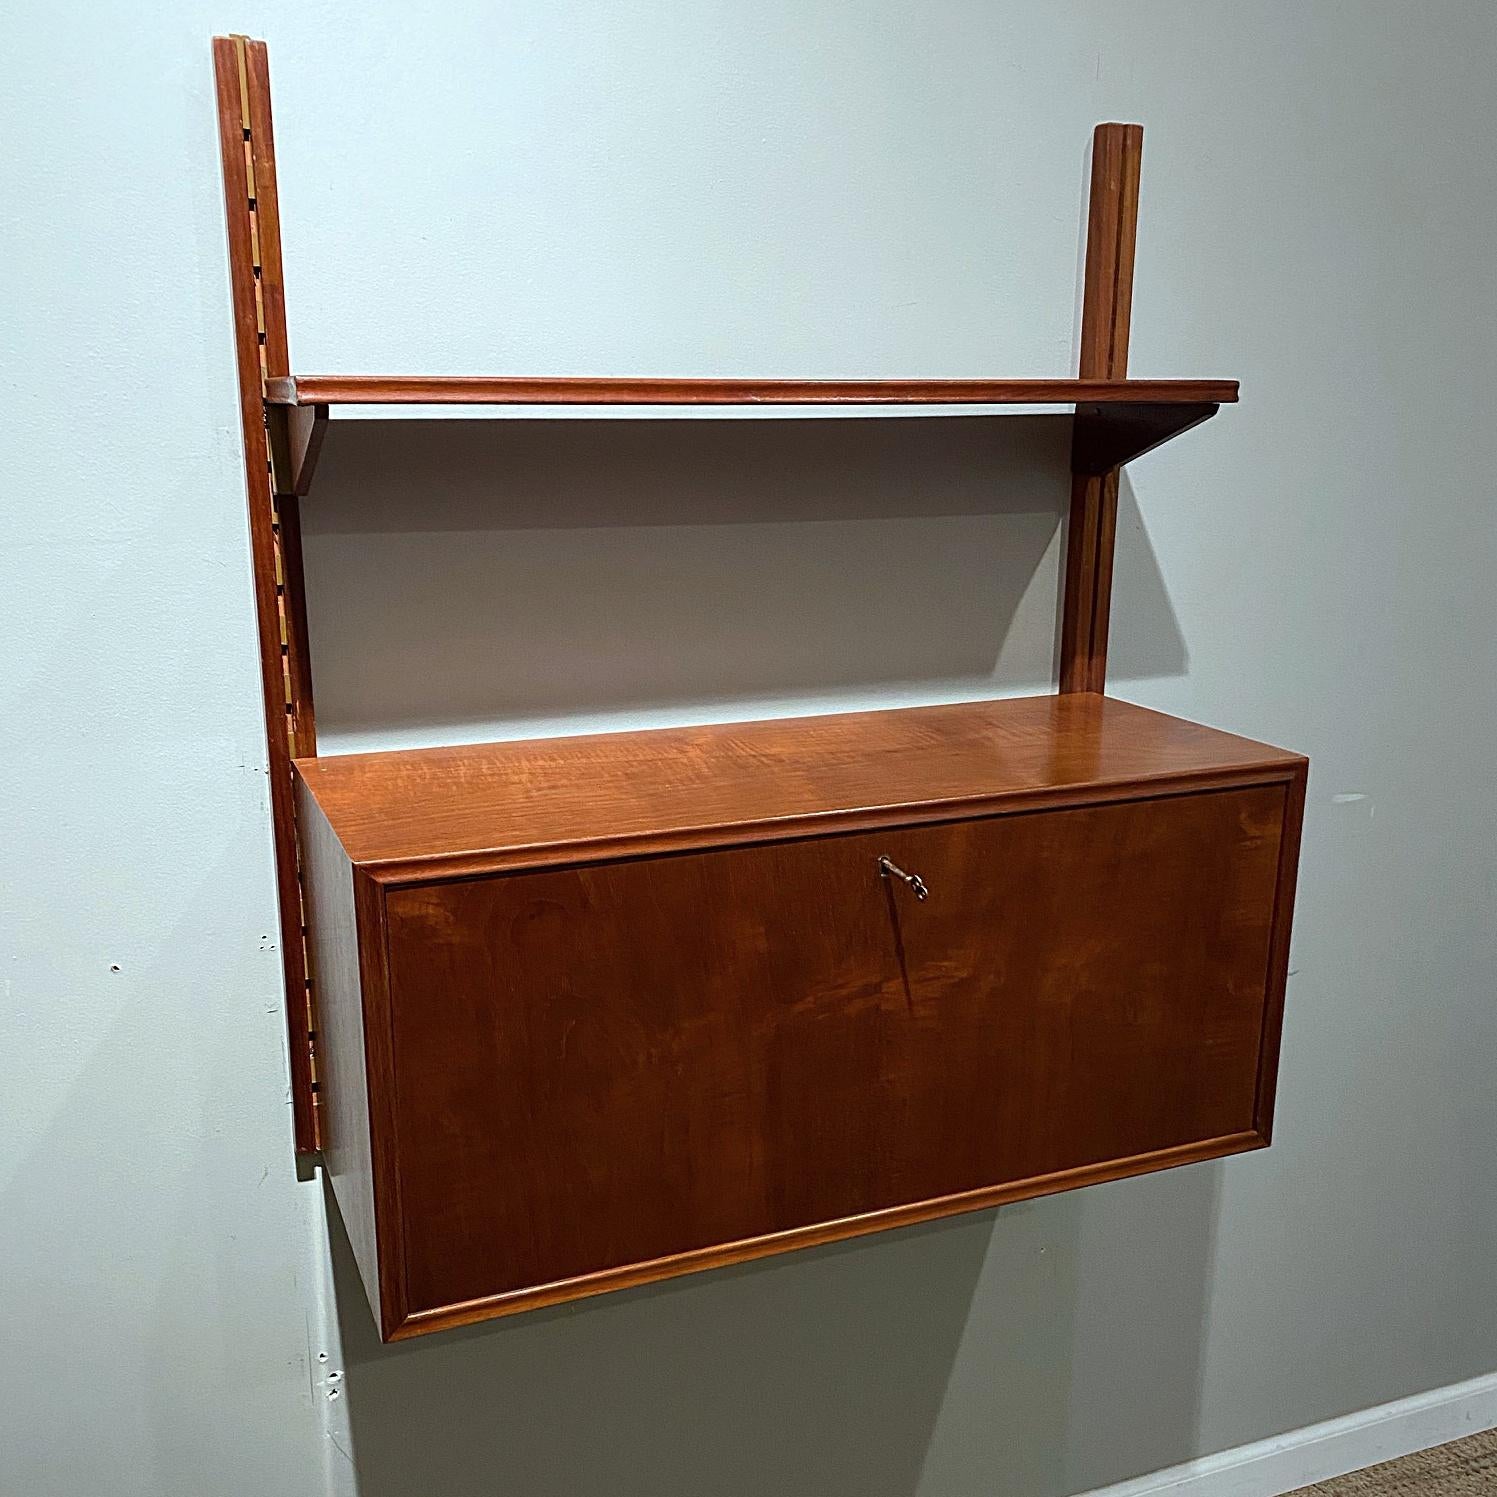 Danish modern child's hanging fall front desk with shelf. Measures: Width- 31 1/2”, depth closed- 12”, depth open- 24”, height- 34 3/4”.